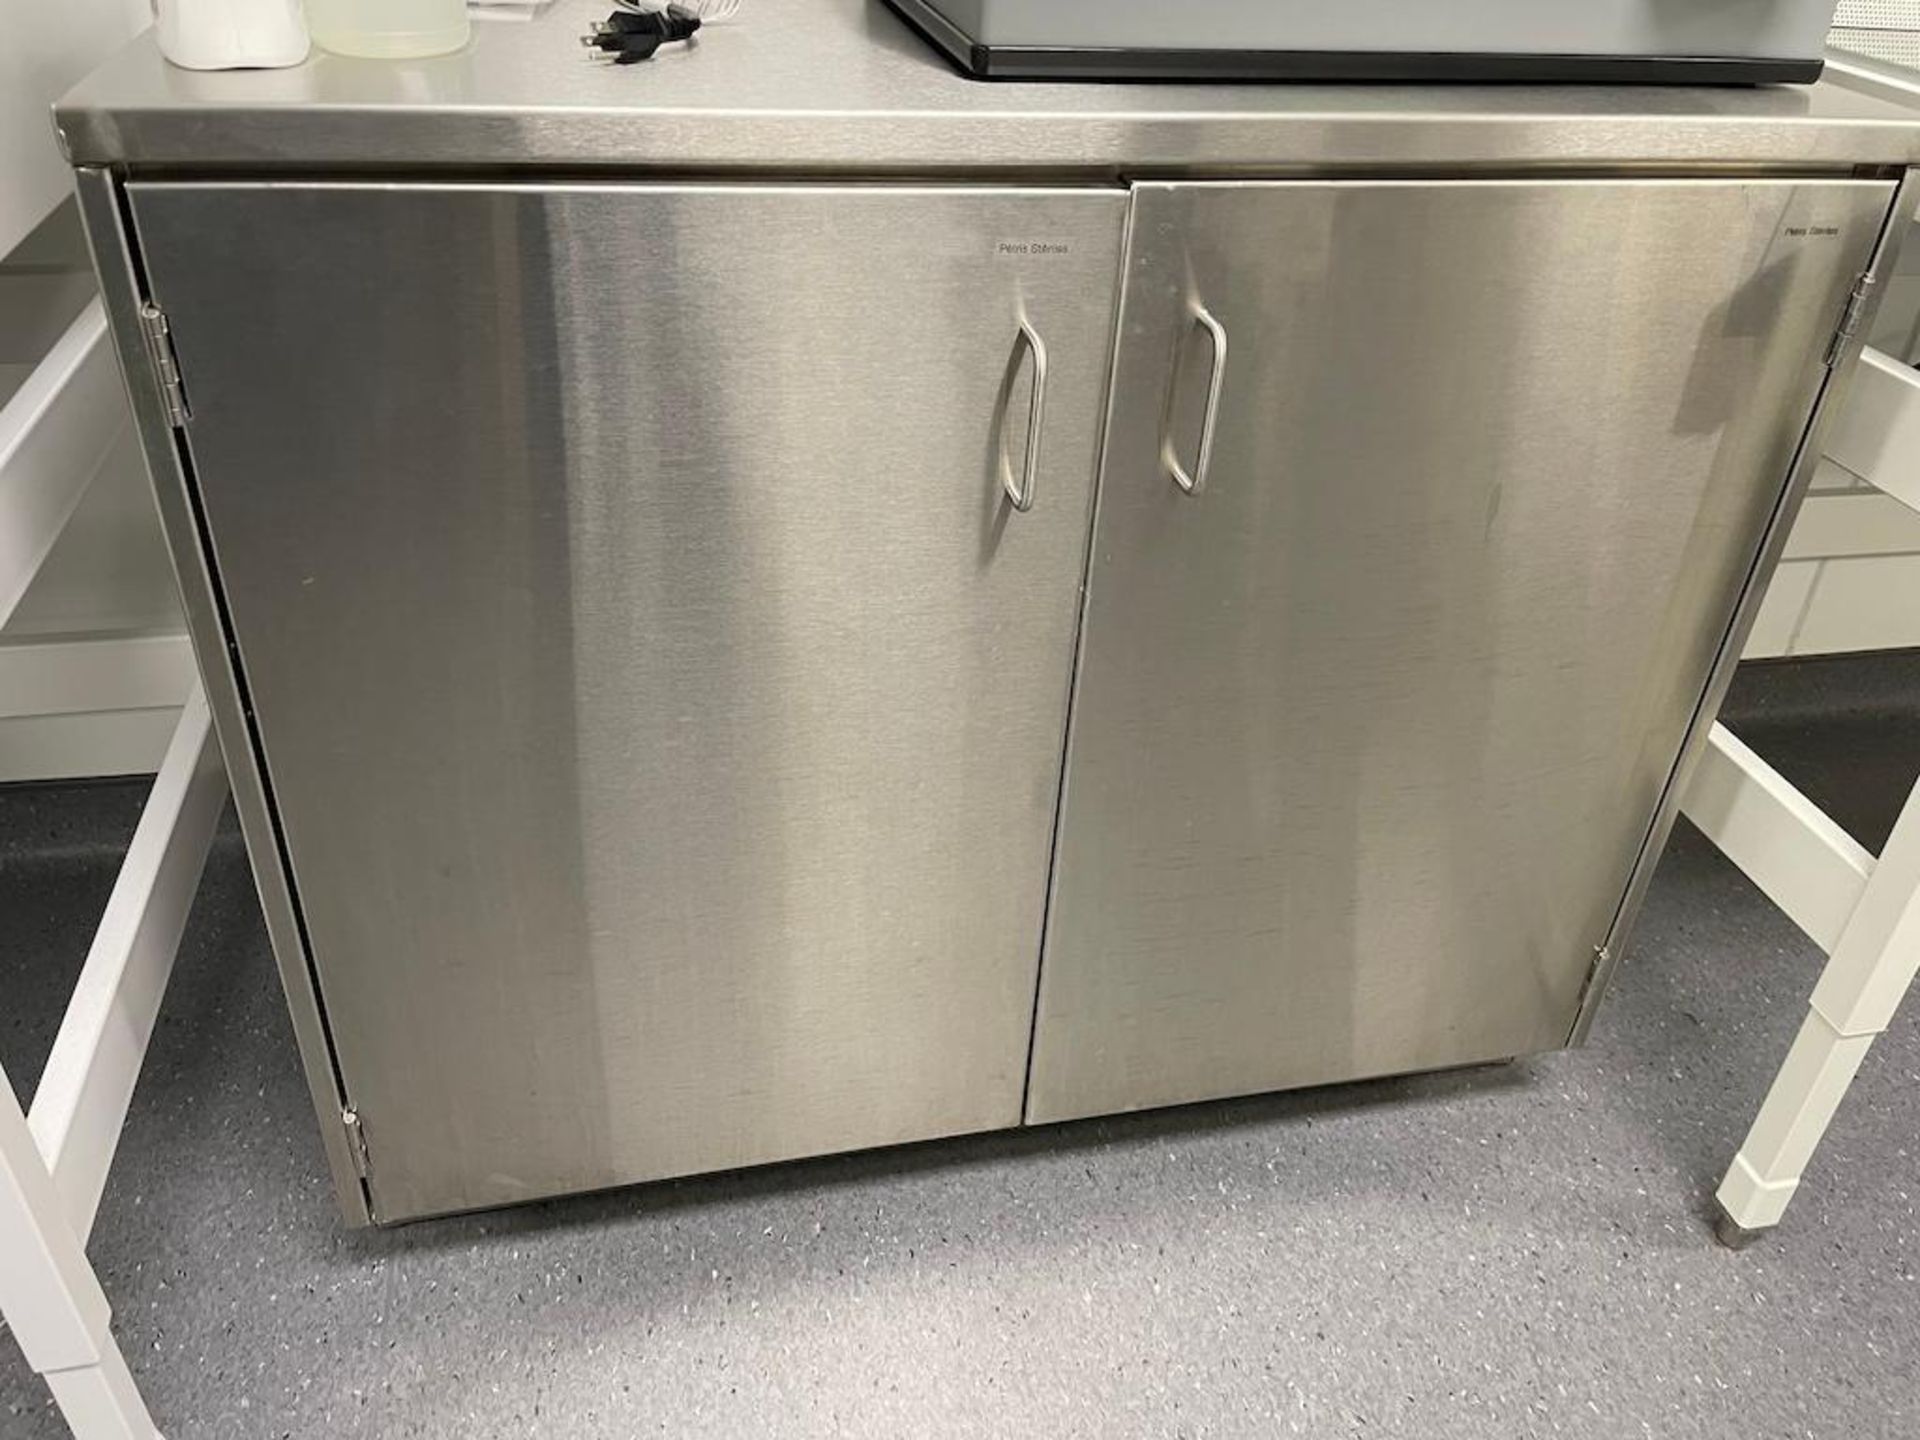 LOT (2) STAINLESS STEEL LAB TABLES APPROX 76 X 33 IN, 36 X 30 IN, (2) STAINLESS STEEL 2 DOOR CABINET - Image 3 of 6